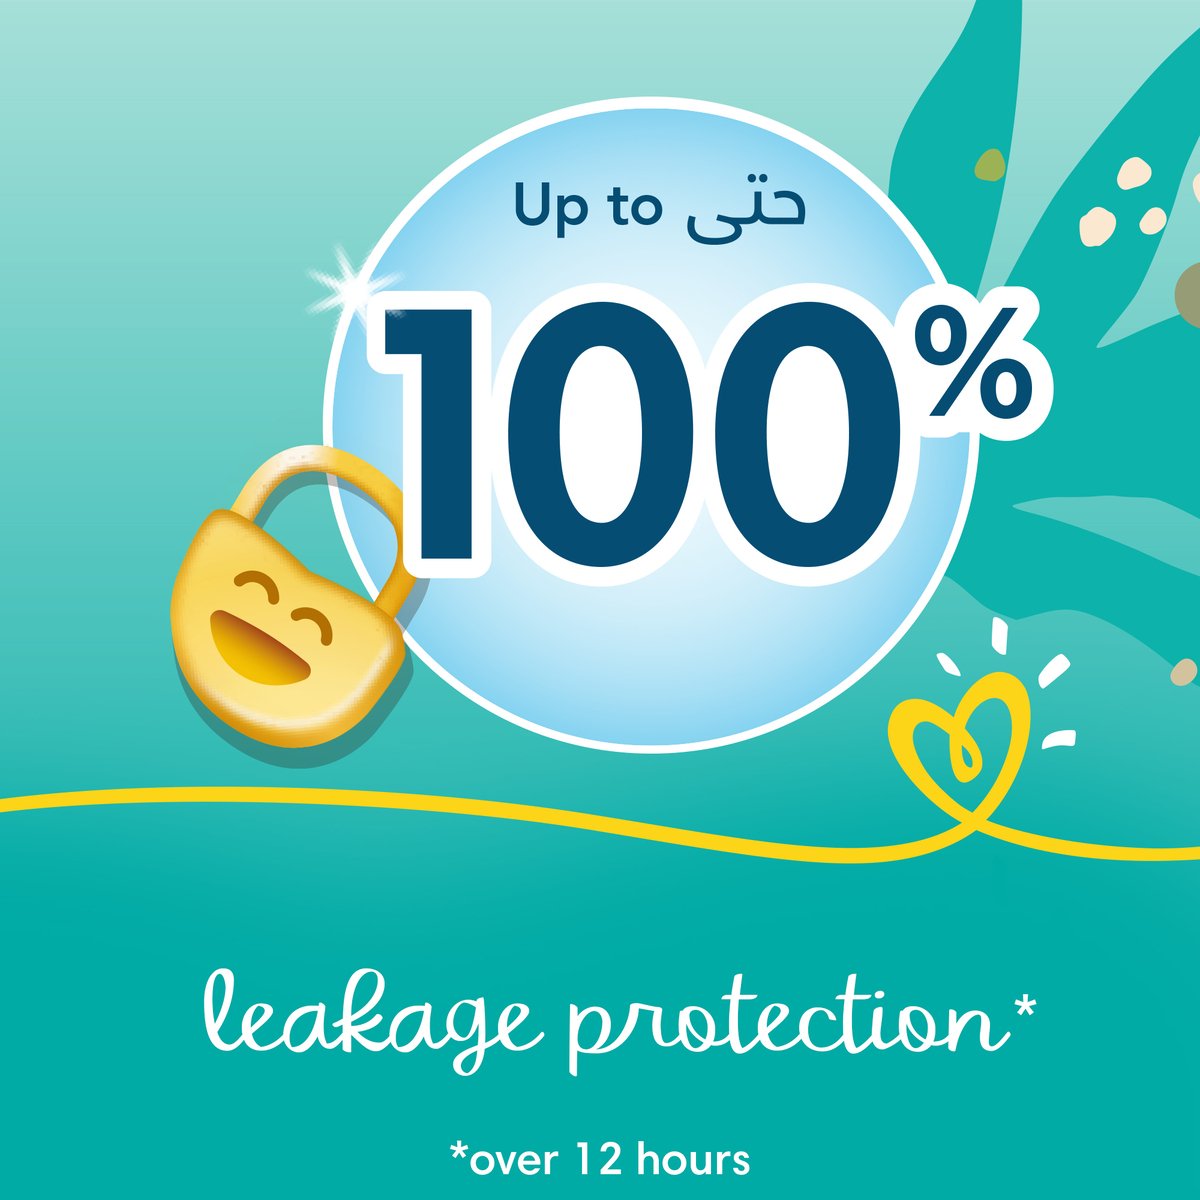 Pampers Baby-Dry Newborn Taped Diapers with Aloe Vera Lotion, up to 100% Leakage Protection, Size 1, 2-5kg, Carry Pack, 21 pcs